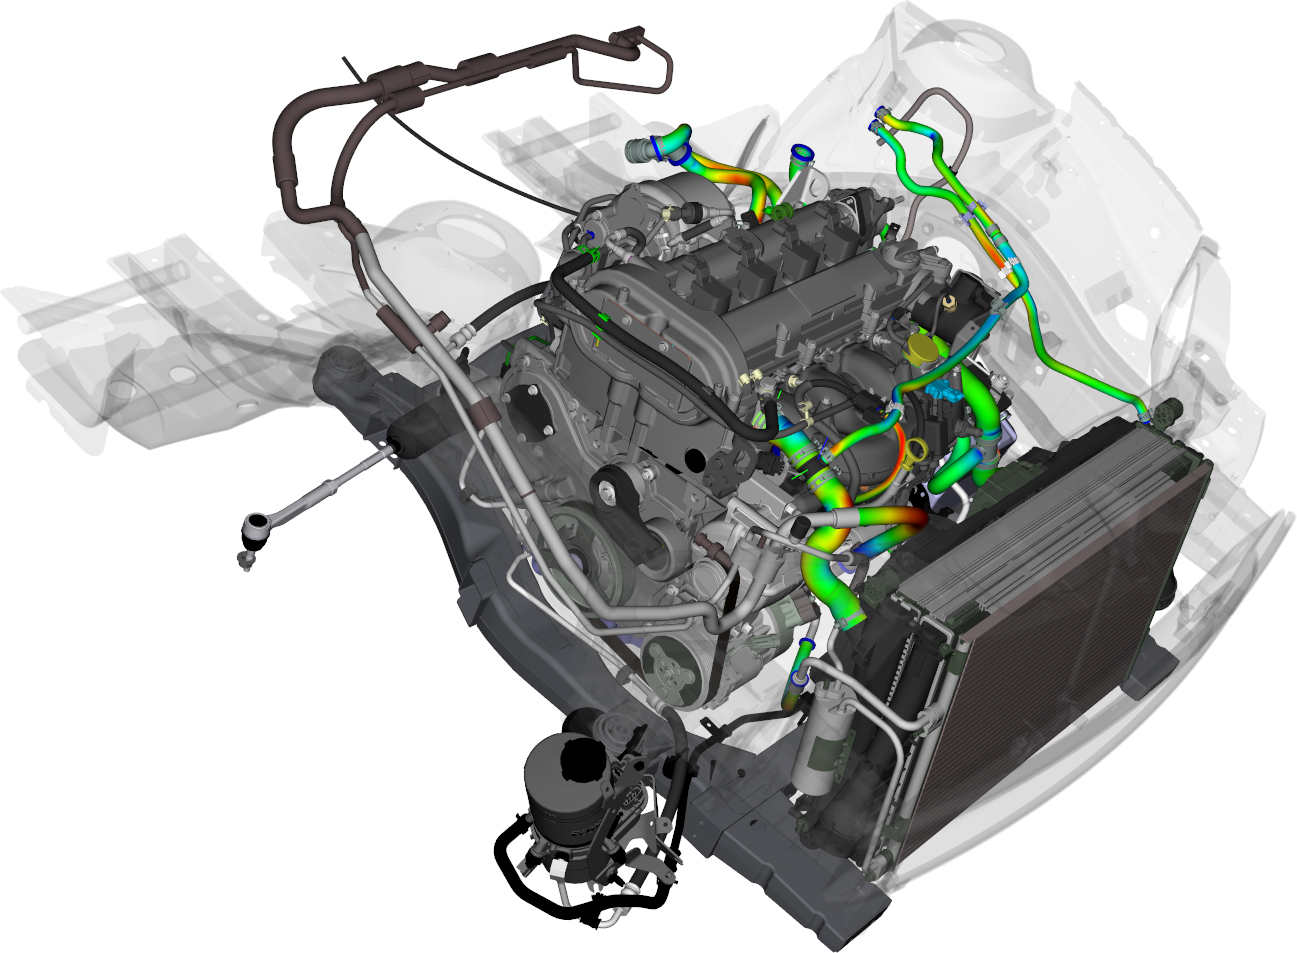 Digital Design of the Flexible Components in the Engine Compartment